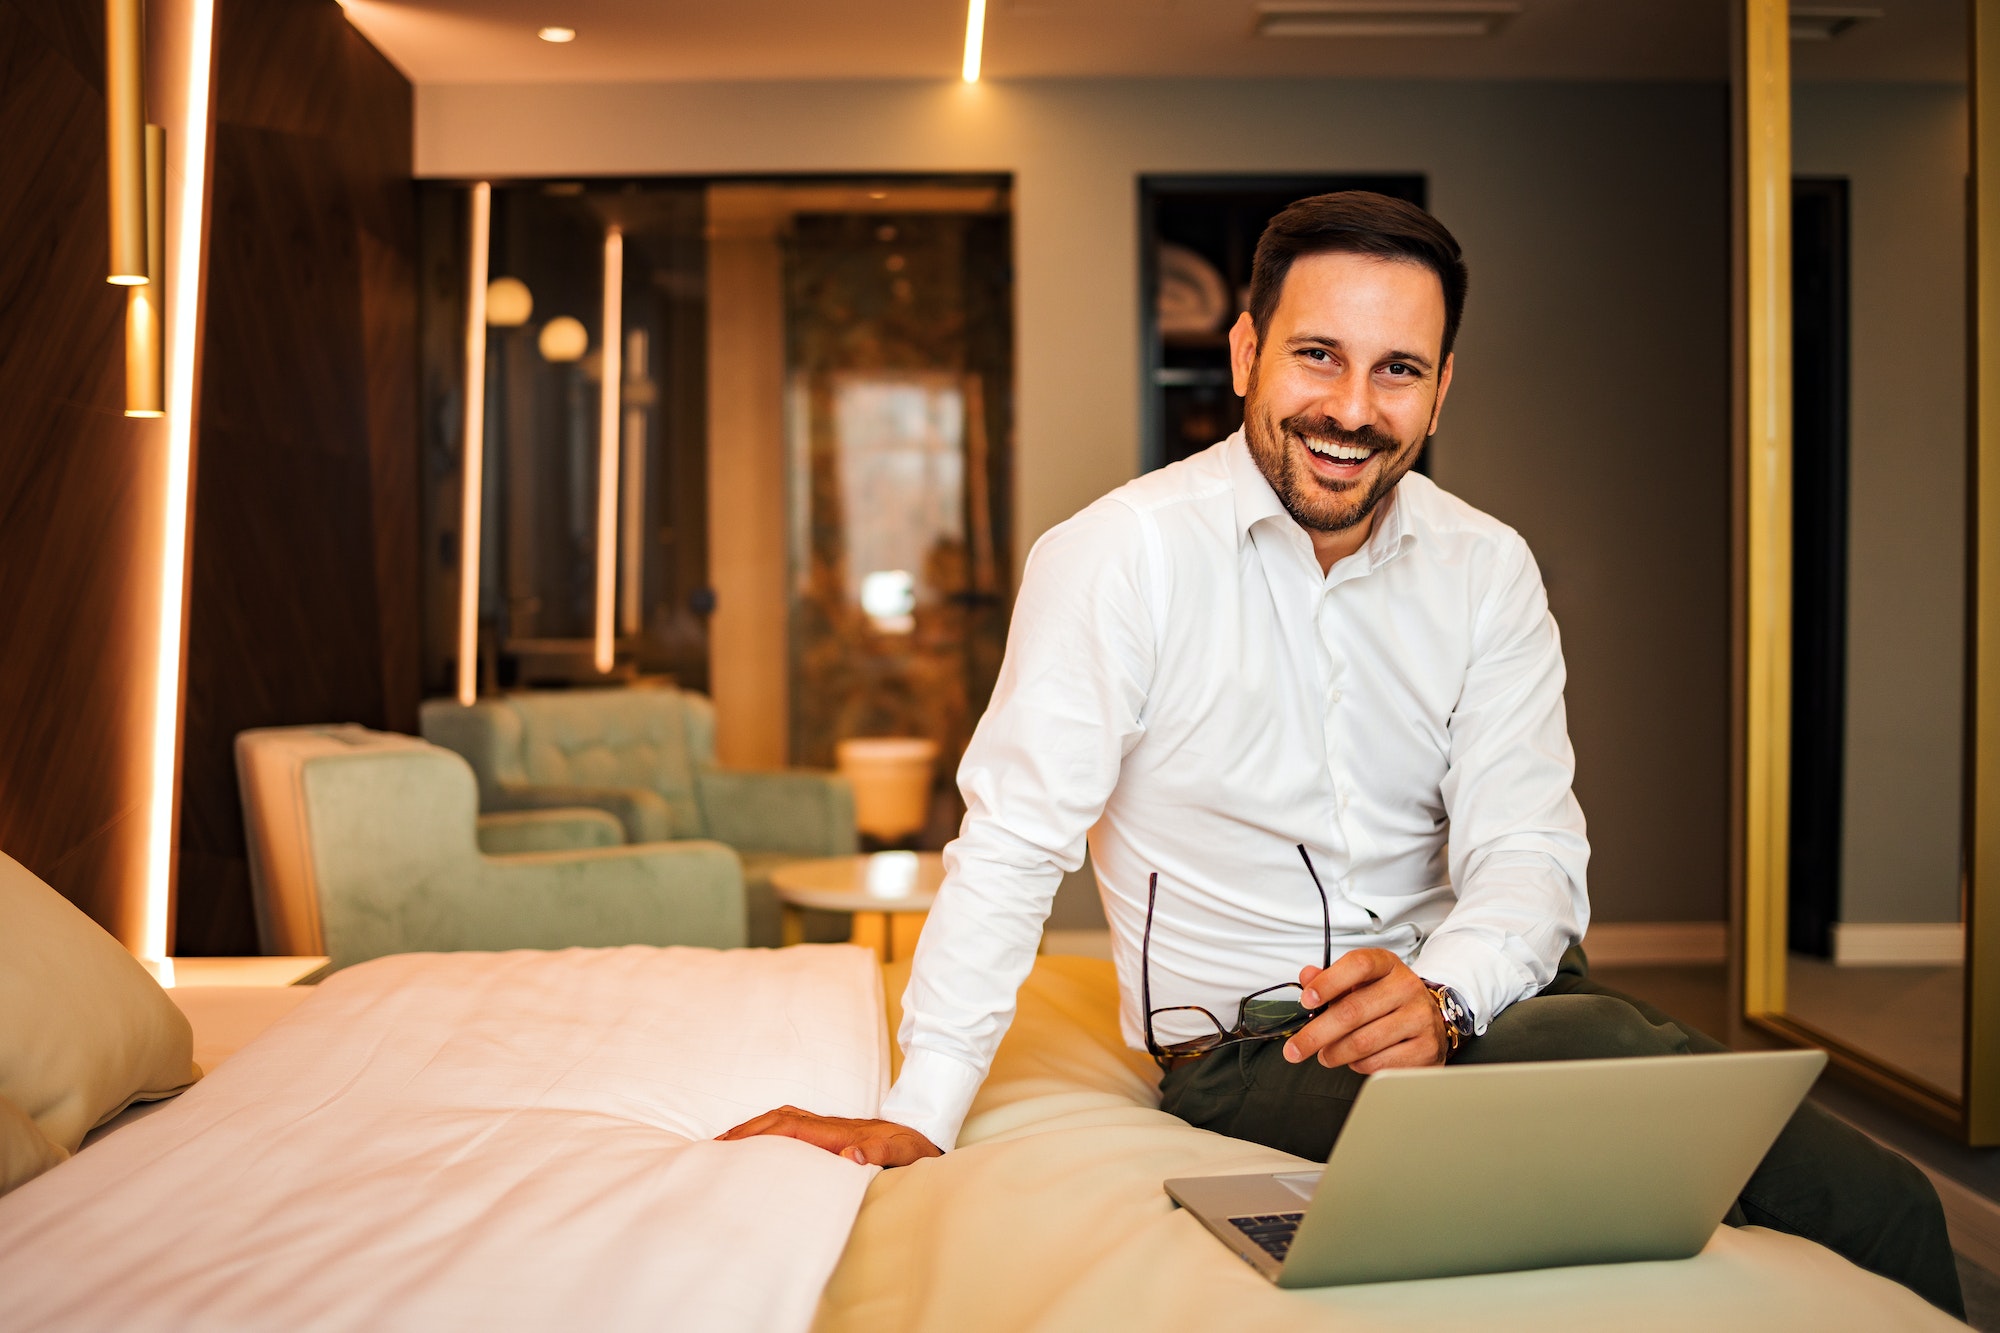 Cheerful businessman sitting on the bed of a hotel room, using laptop and smiling at camera.